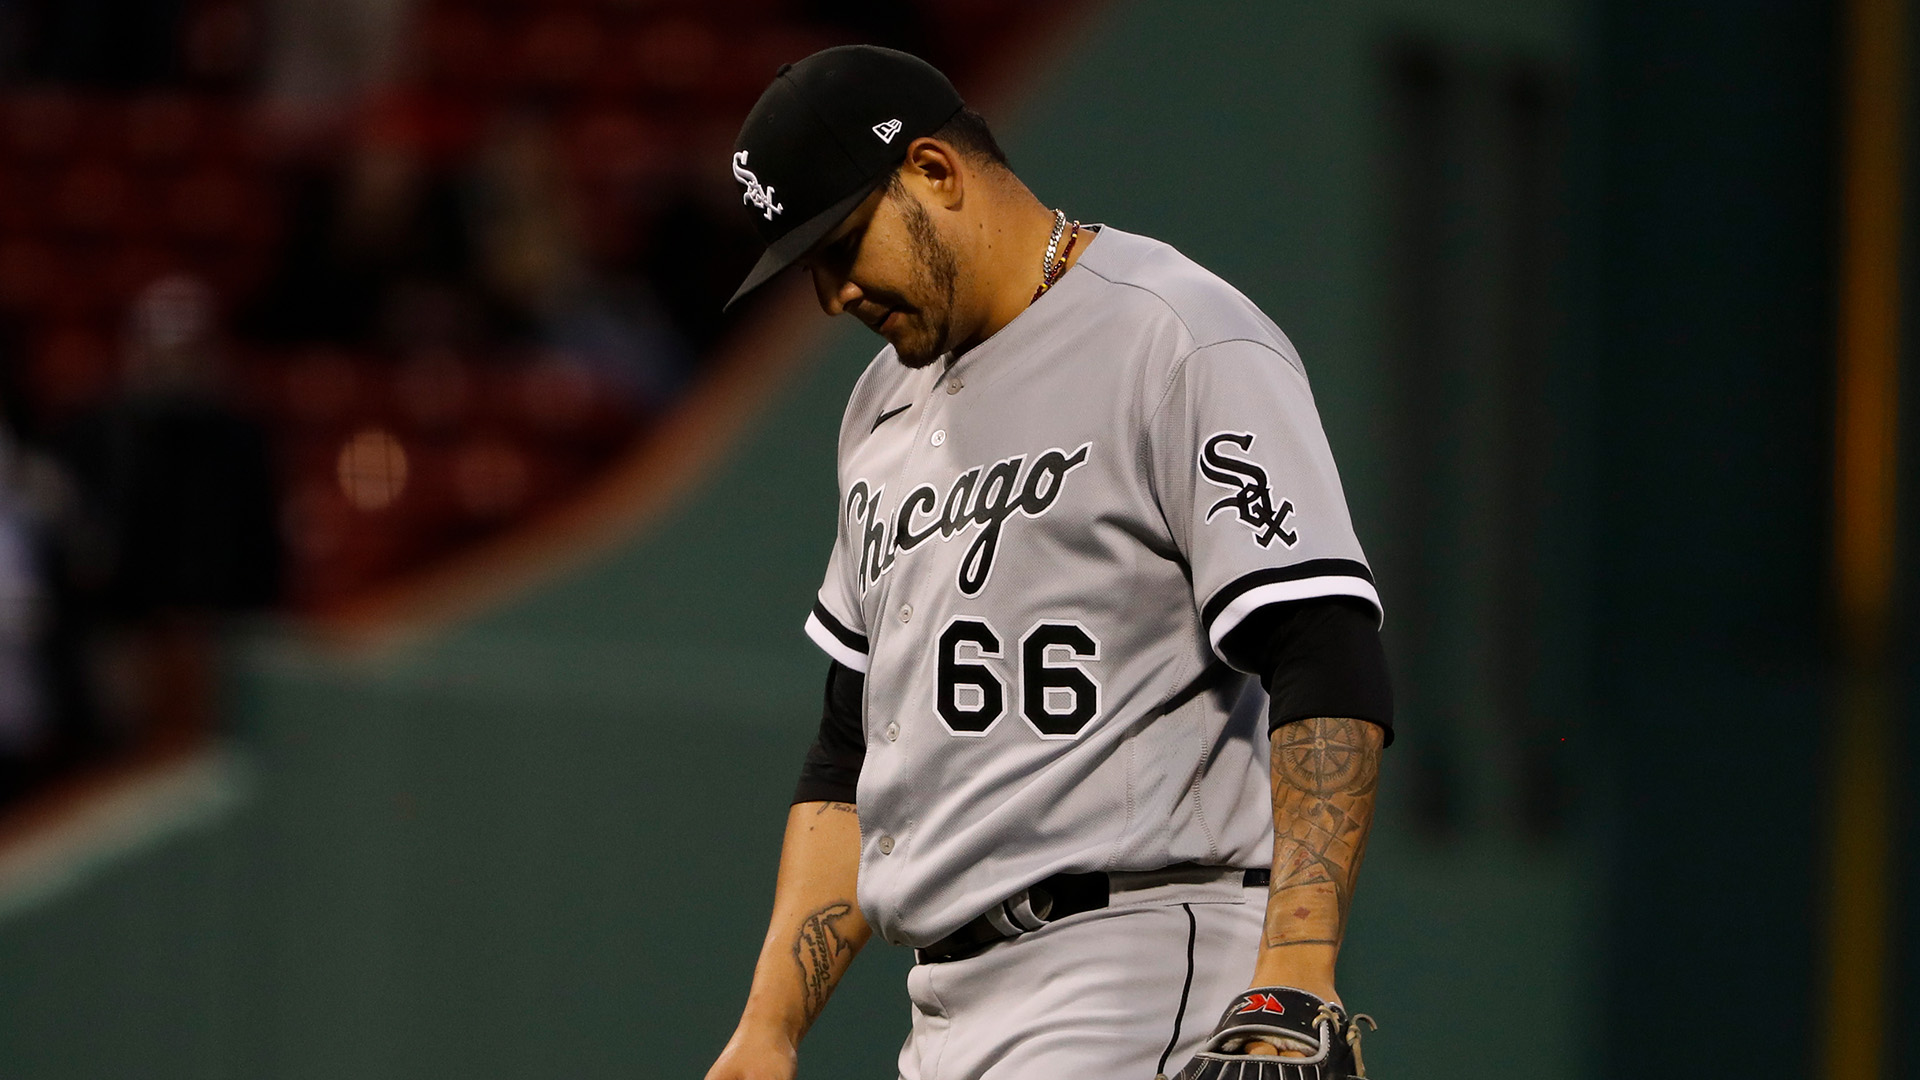 Tony La Russa has harsh assessment of his performance as White Sox